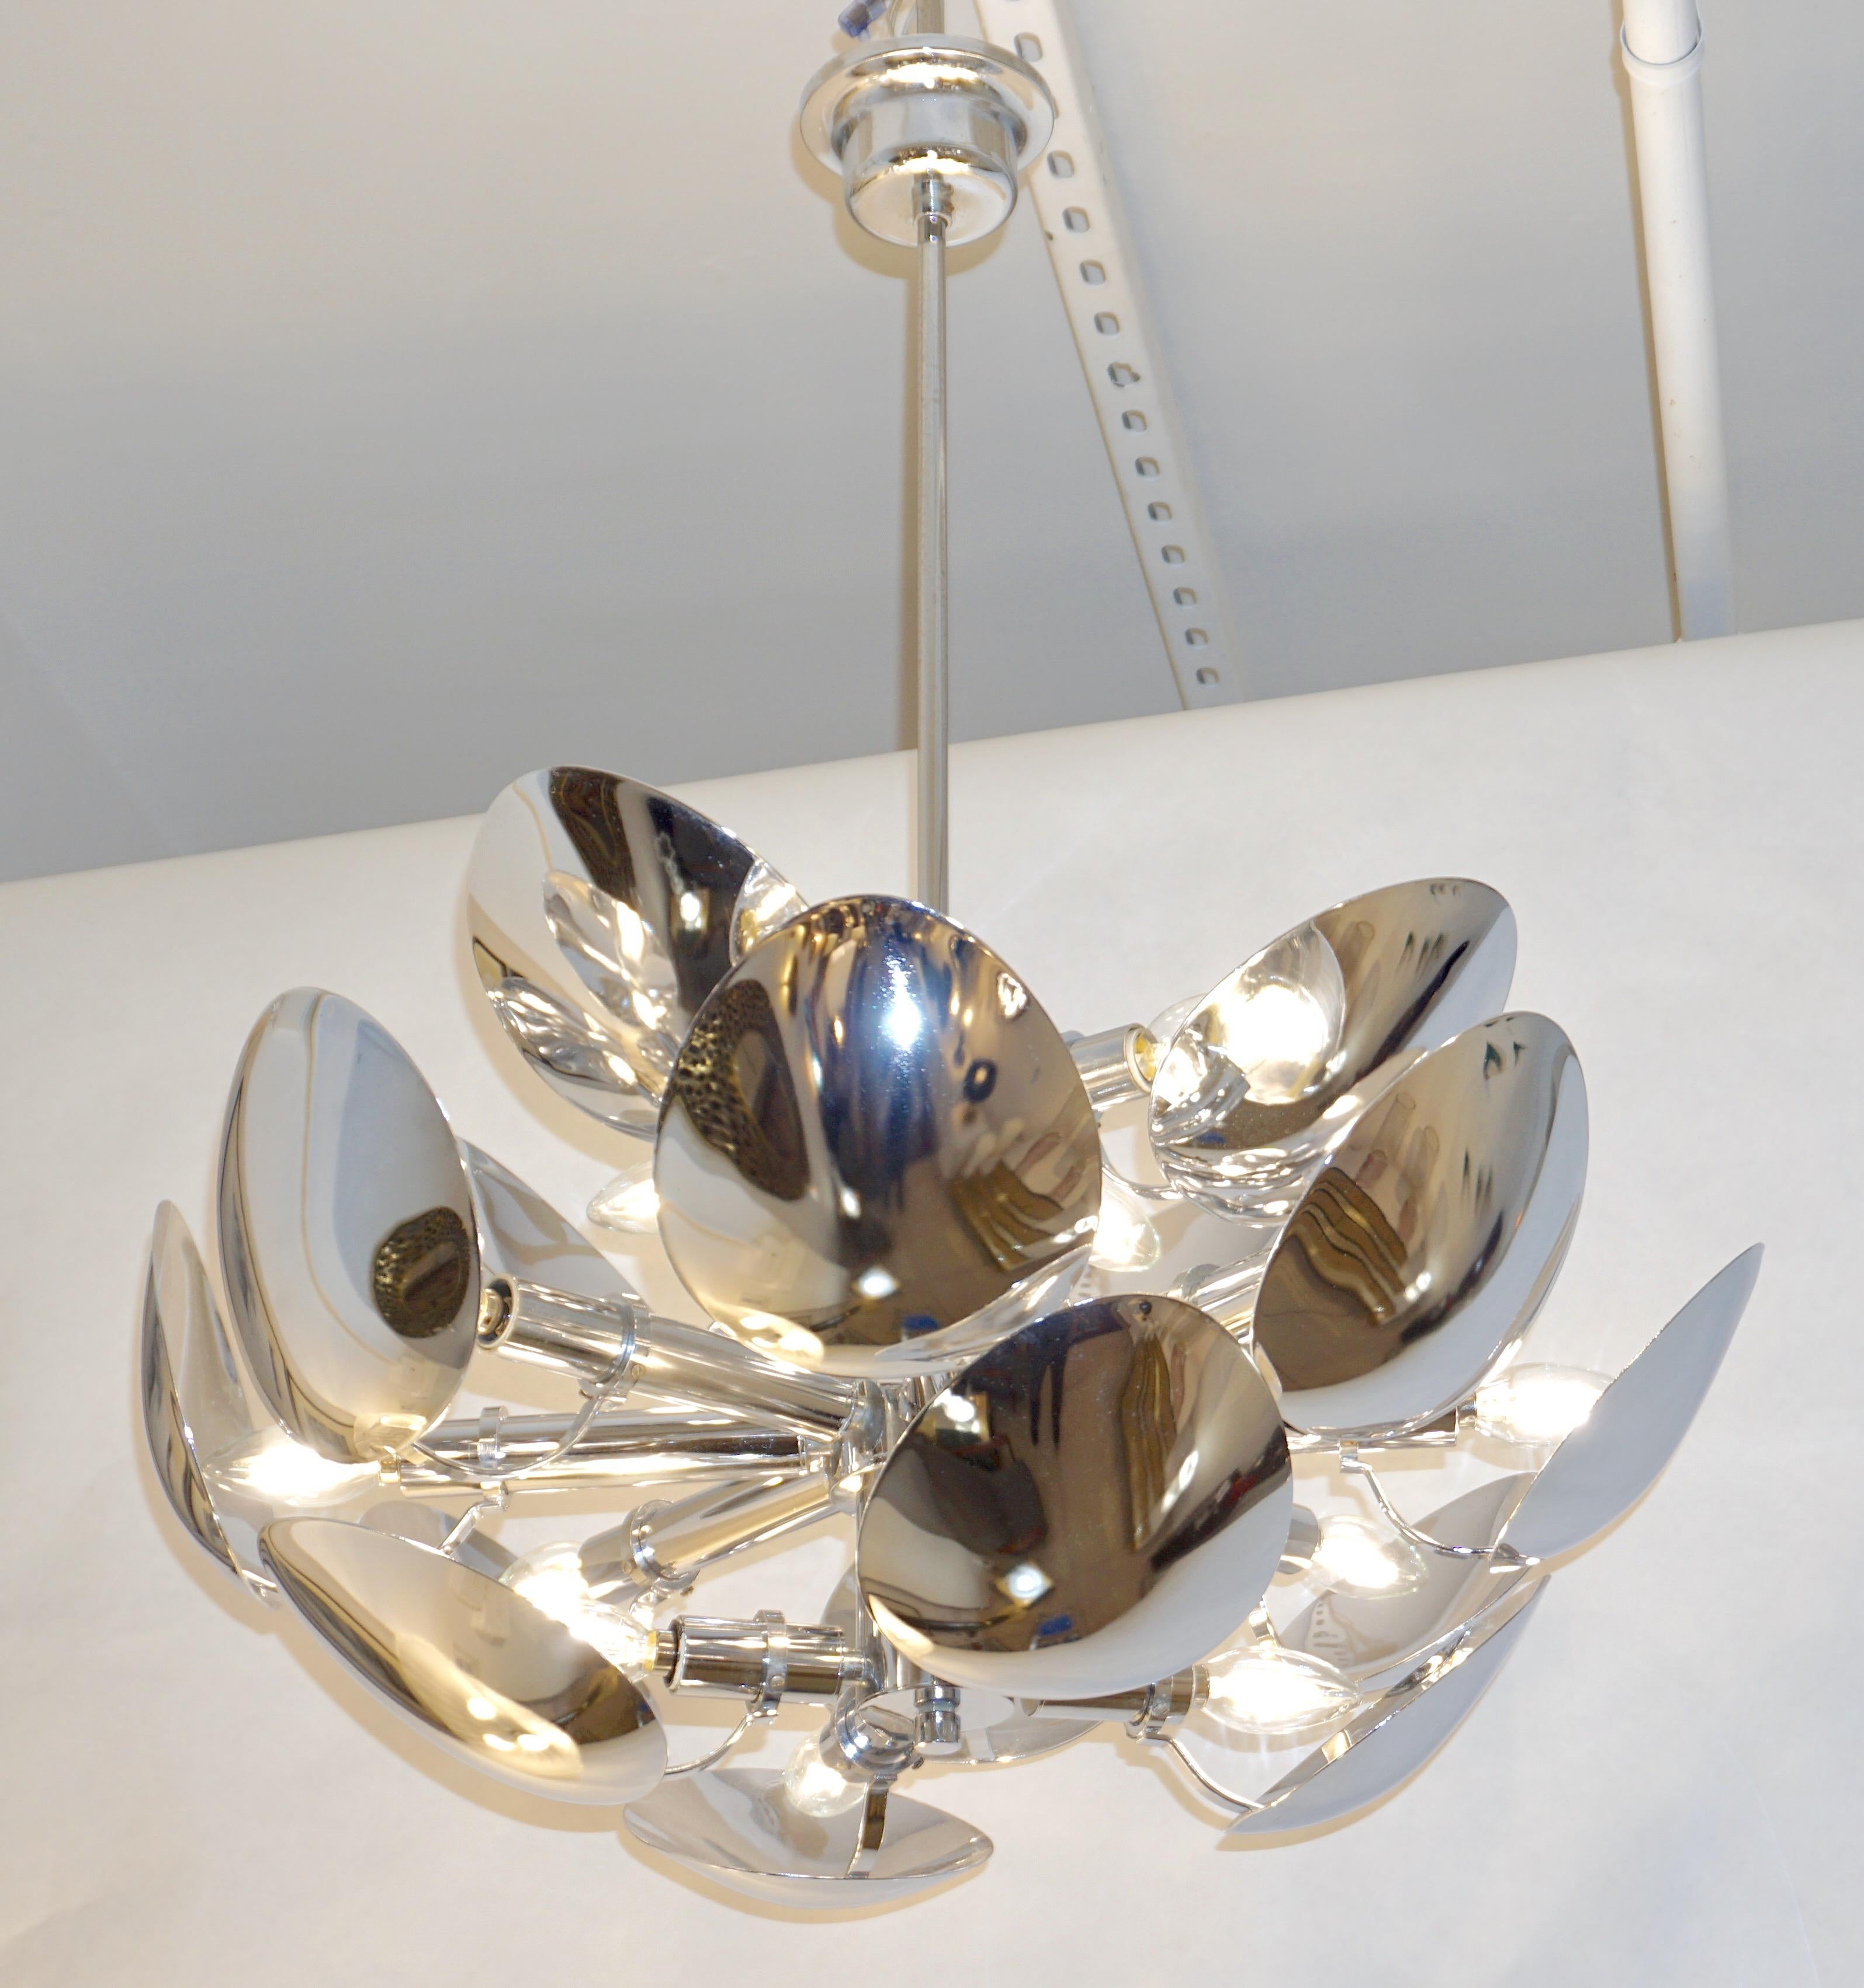 Mid-20th century Italian light fixture by Reggiani, composed of 16 overlapping concave silver chrome oval leaves that hide the light source and depart from a central pole. The construction and design produce very atmospheric ambient lighting. High